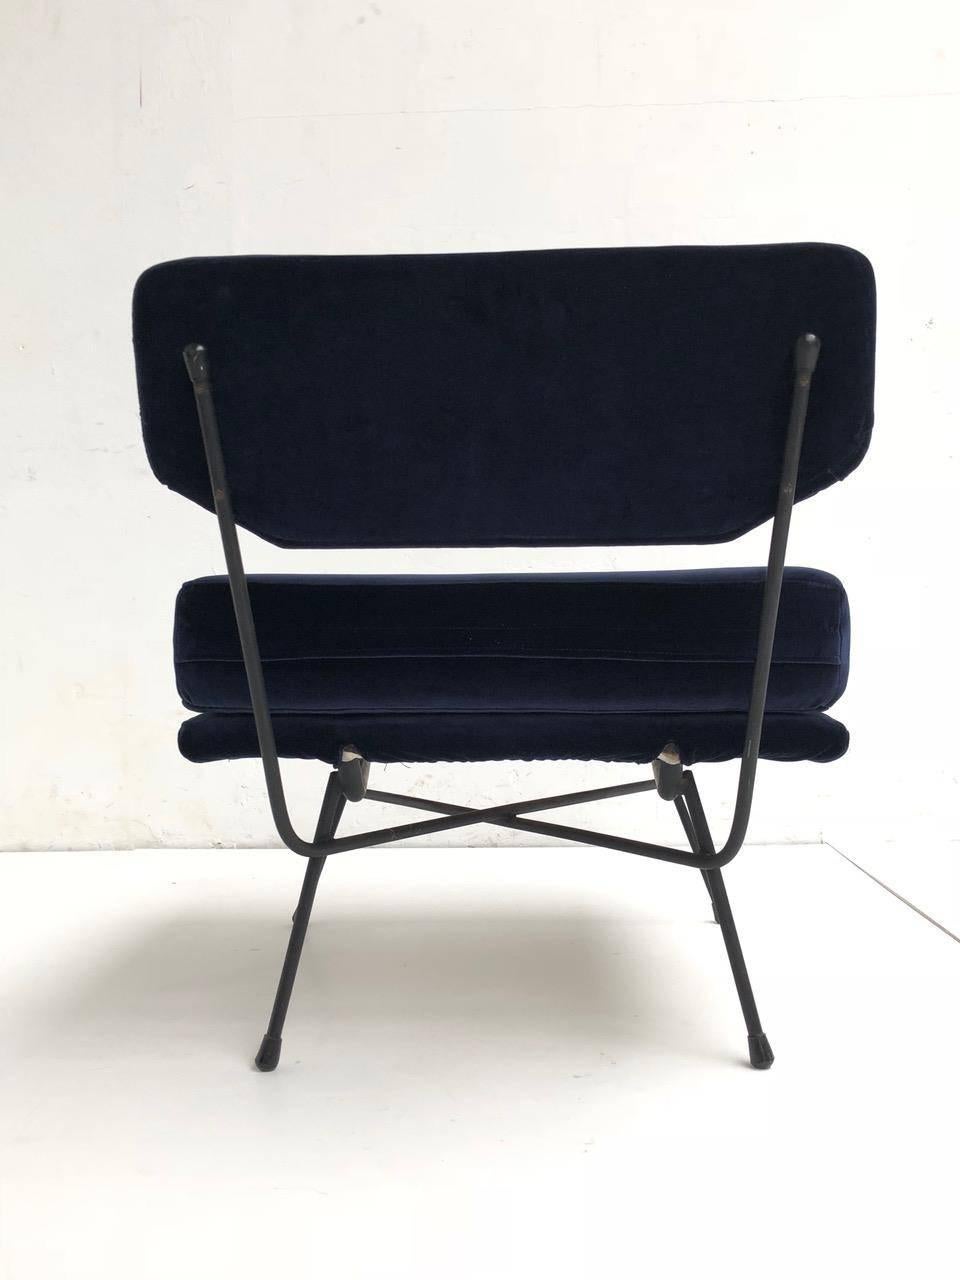 Italian Pair of 'Elettra' Lounge Chairs by BBPR , Arflex, Italy 1953, Compasso D'Oro 1954